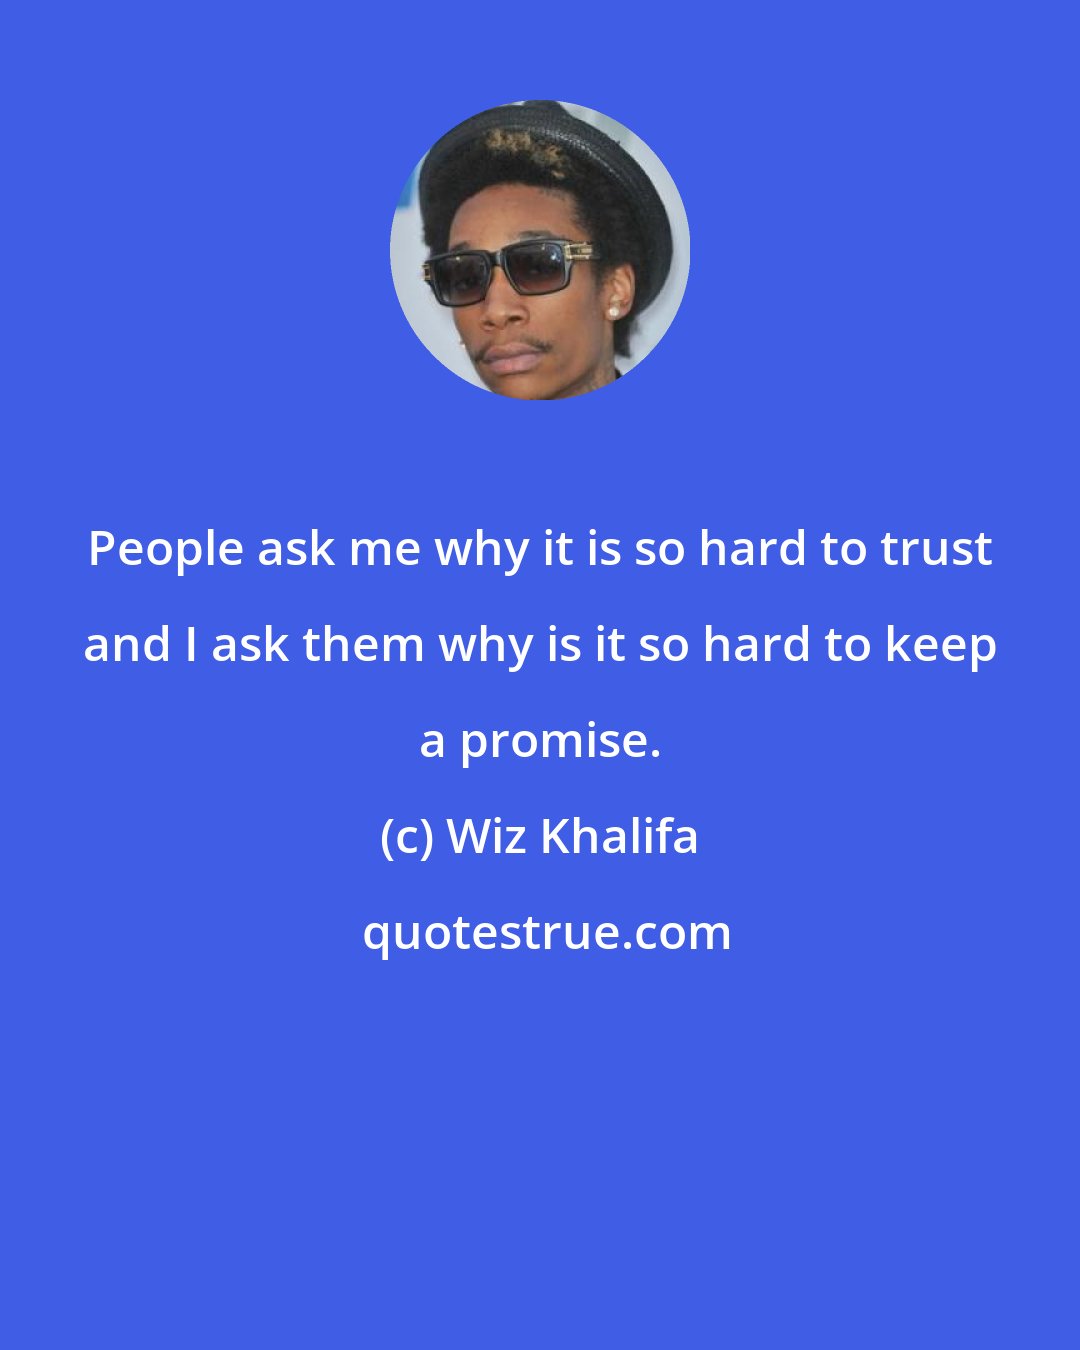 Wiz Khalifa: People ask me why it is so hard to trust and I ask them why is it so hard to keep a promise.